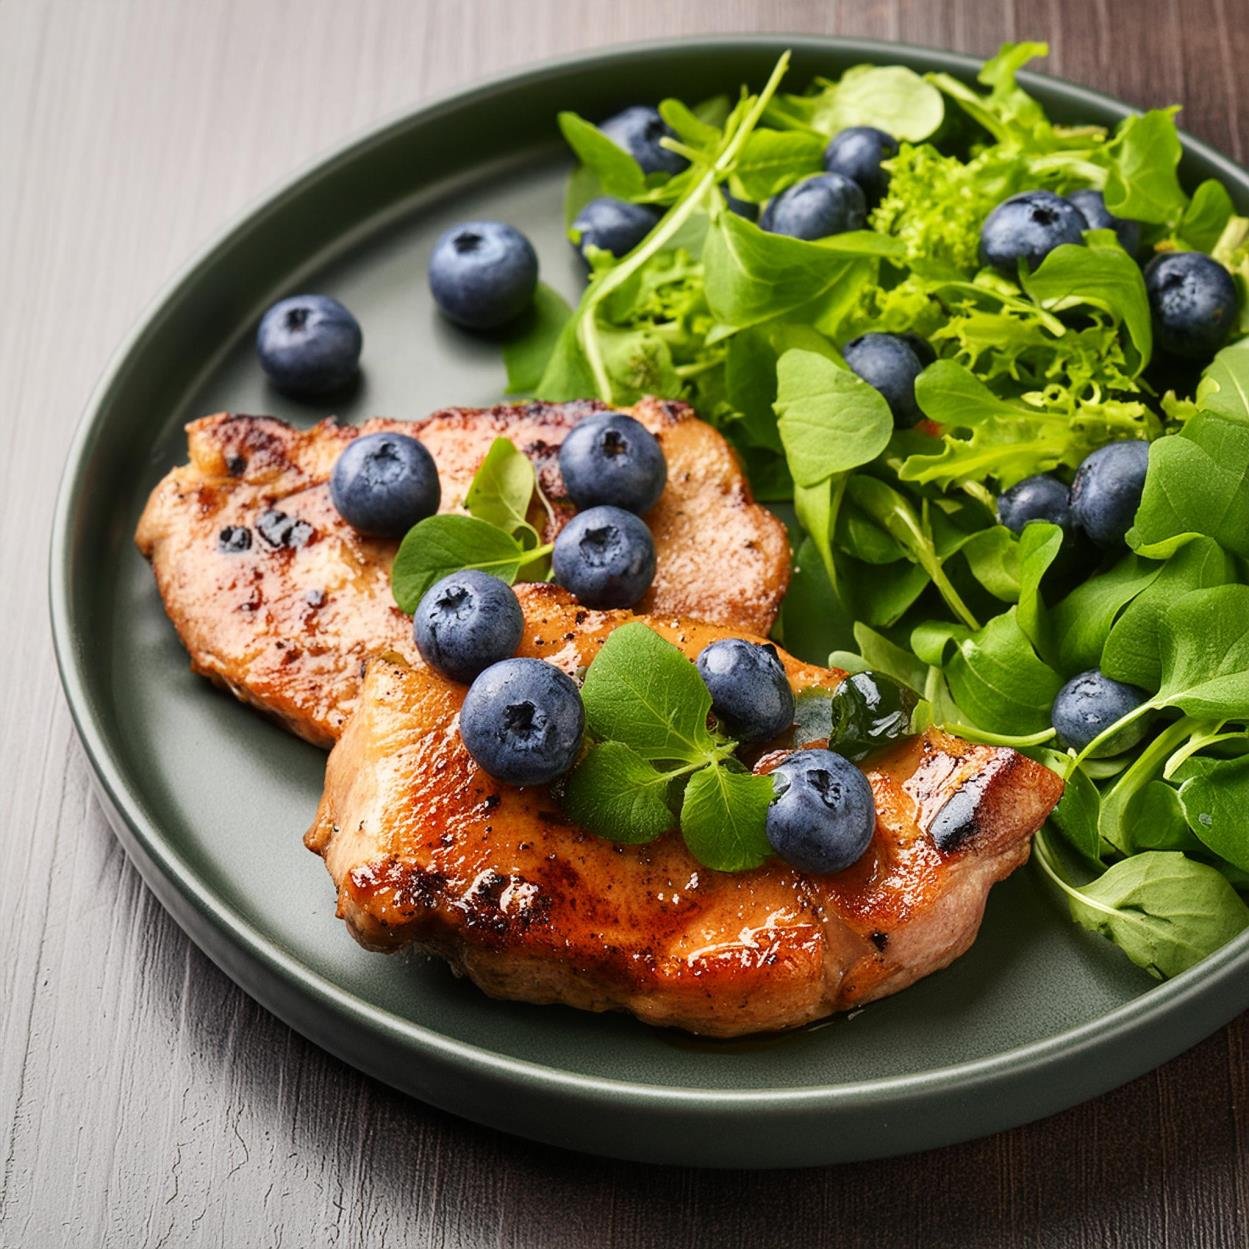 Grilled Pork Chops with Blueberry-Cilantro Salsa and Spring Mix Salad